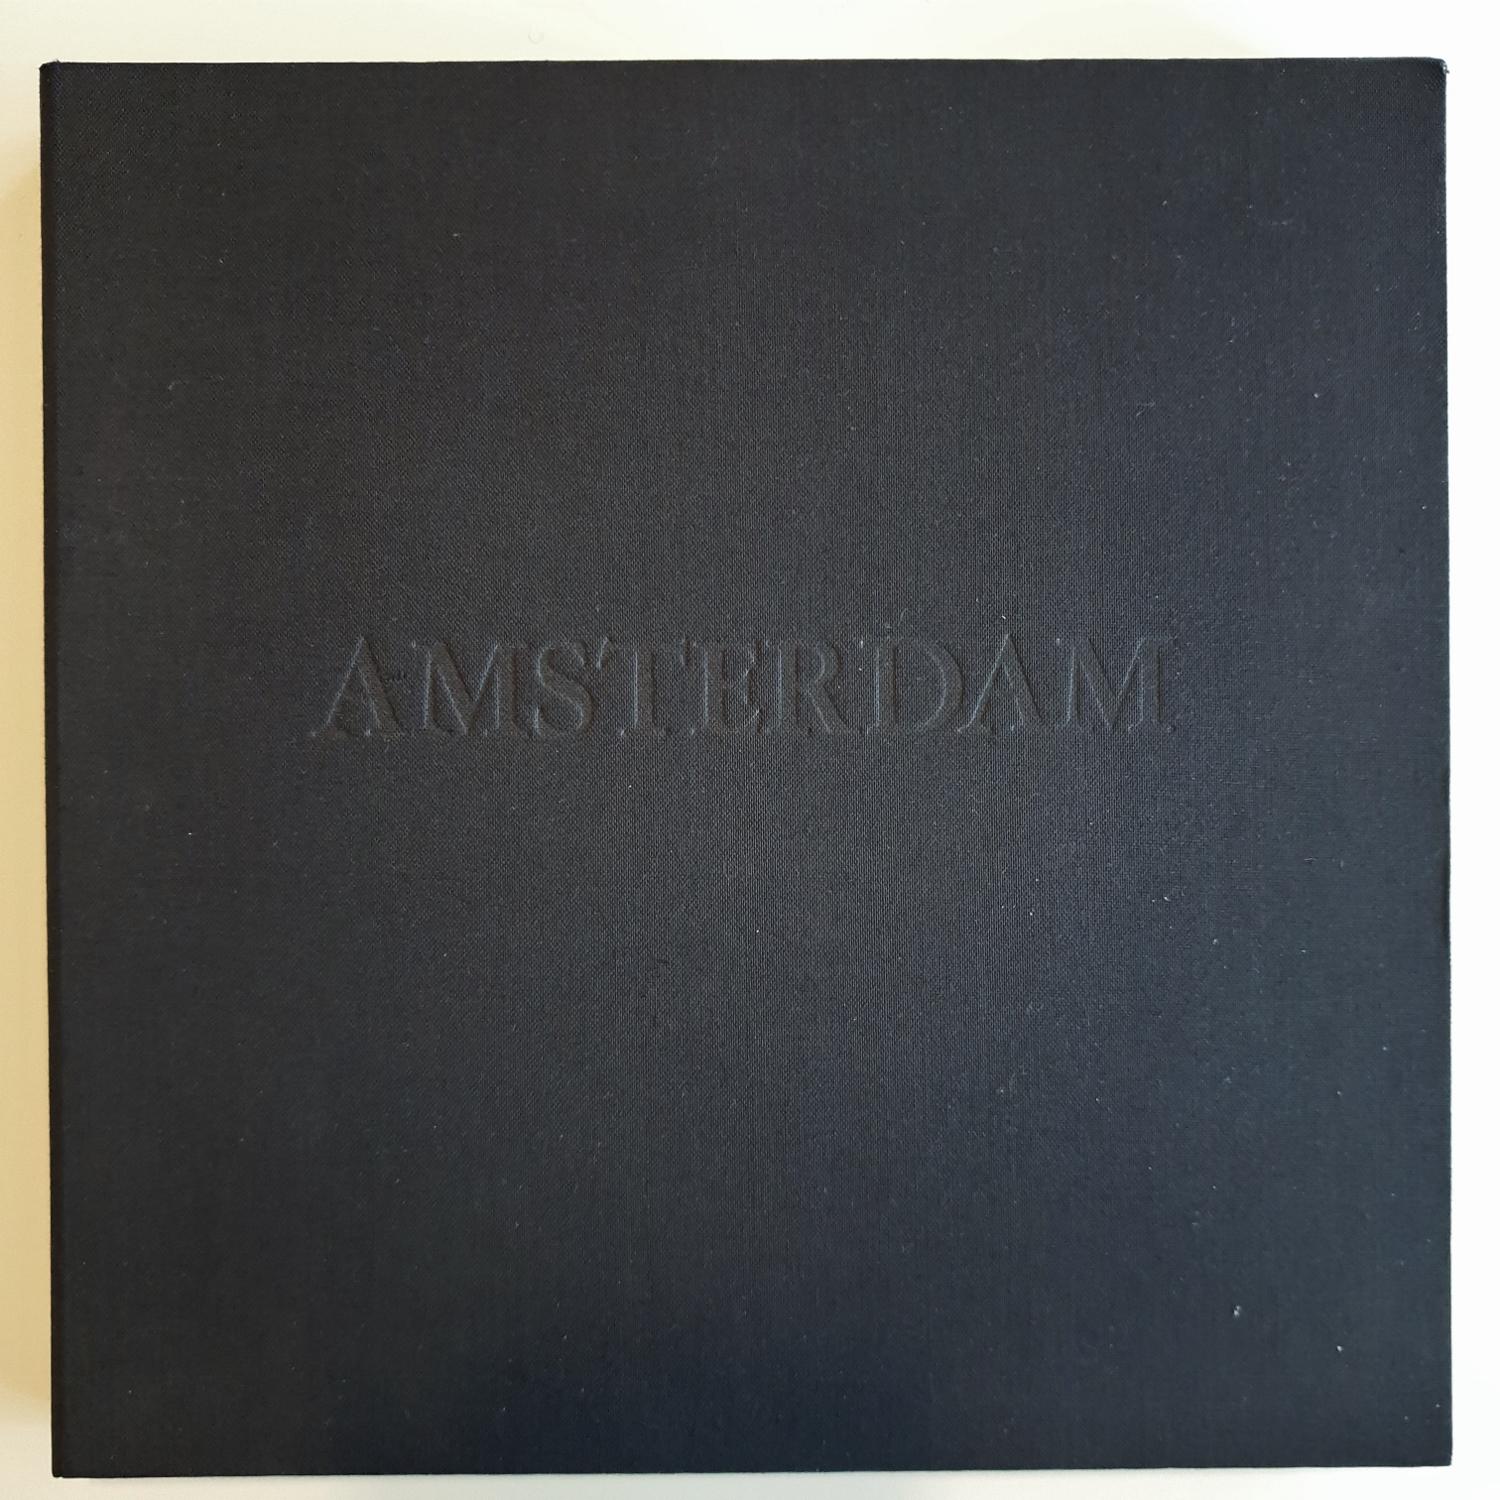 Amsterdam VIII is an intriguing early career aquatint dry-needle etch print by renowned French-Dutch artist Olivier Julia. It depicts a detail of an old Amsterdam house facade is both abstract and realistic at the same time. The paper used is 240